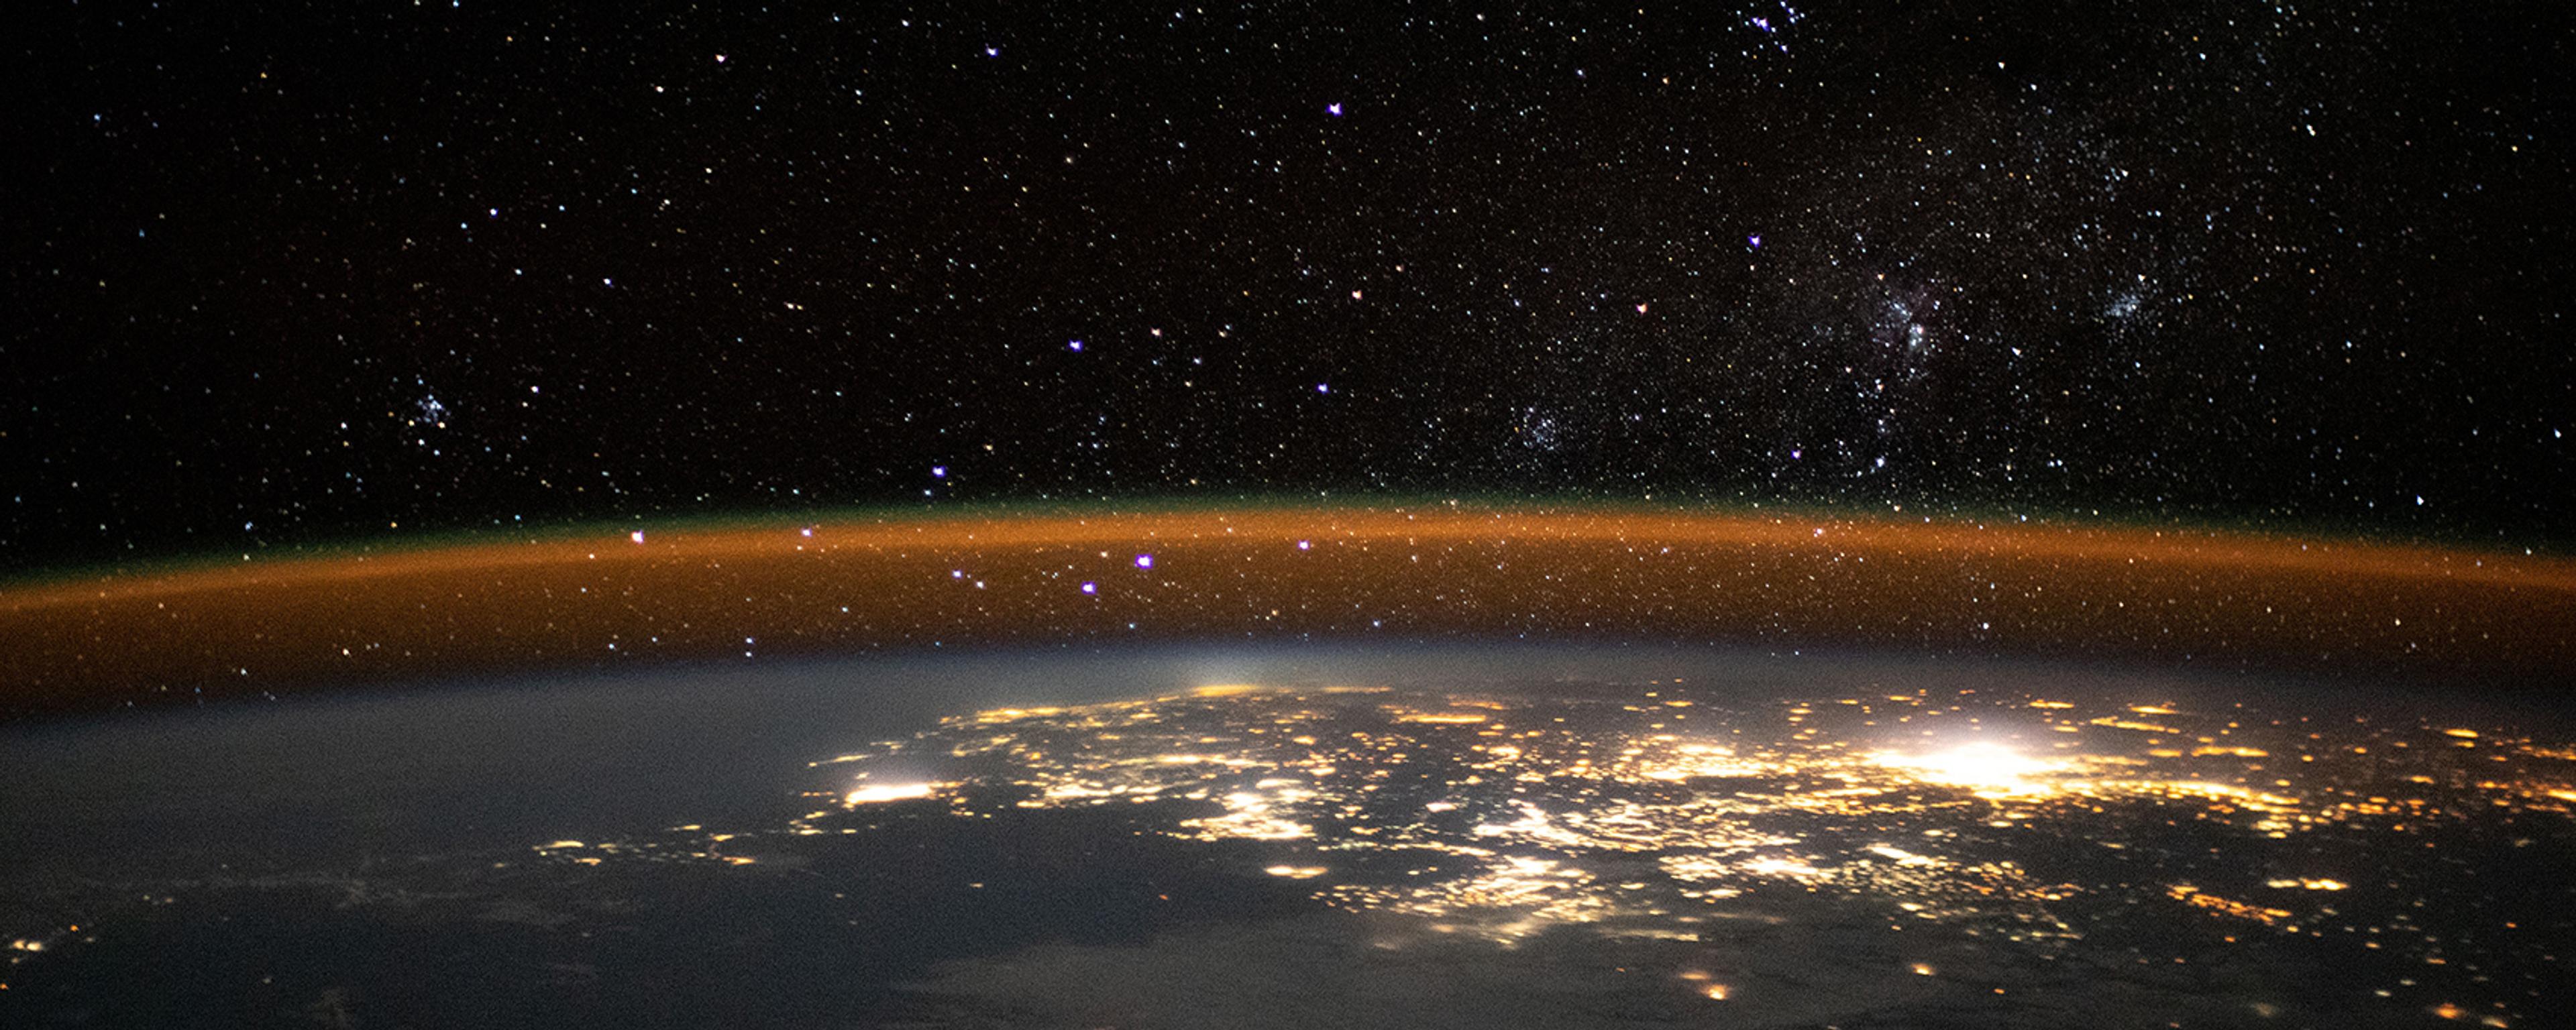 An image shows the earth horizon at night seen from space. The lights of a city glow beneath the vast starry night of space